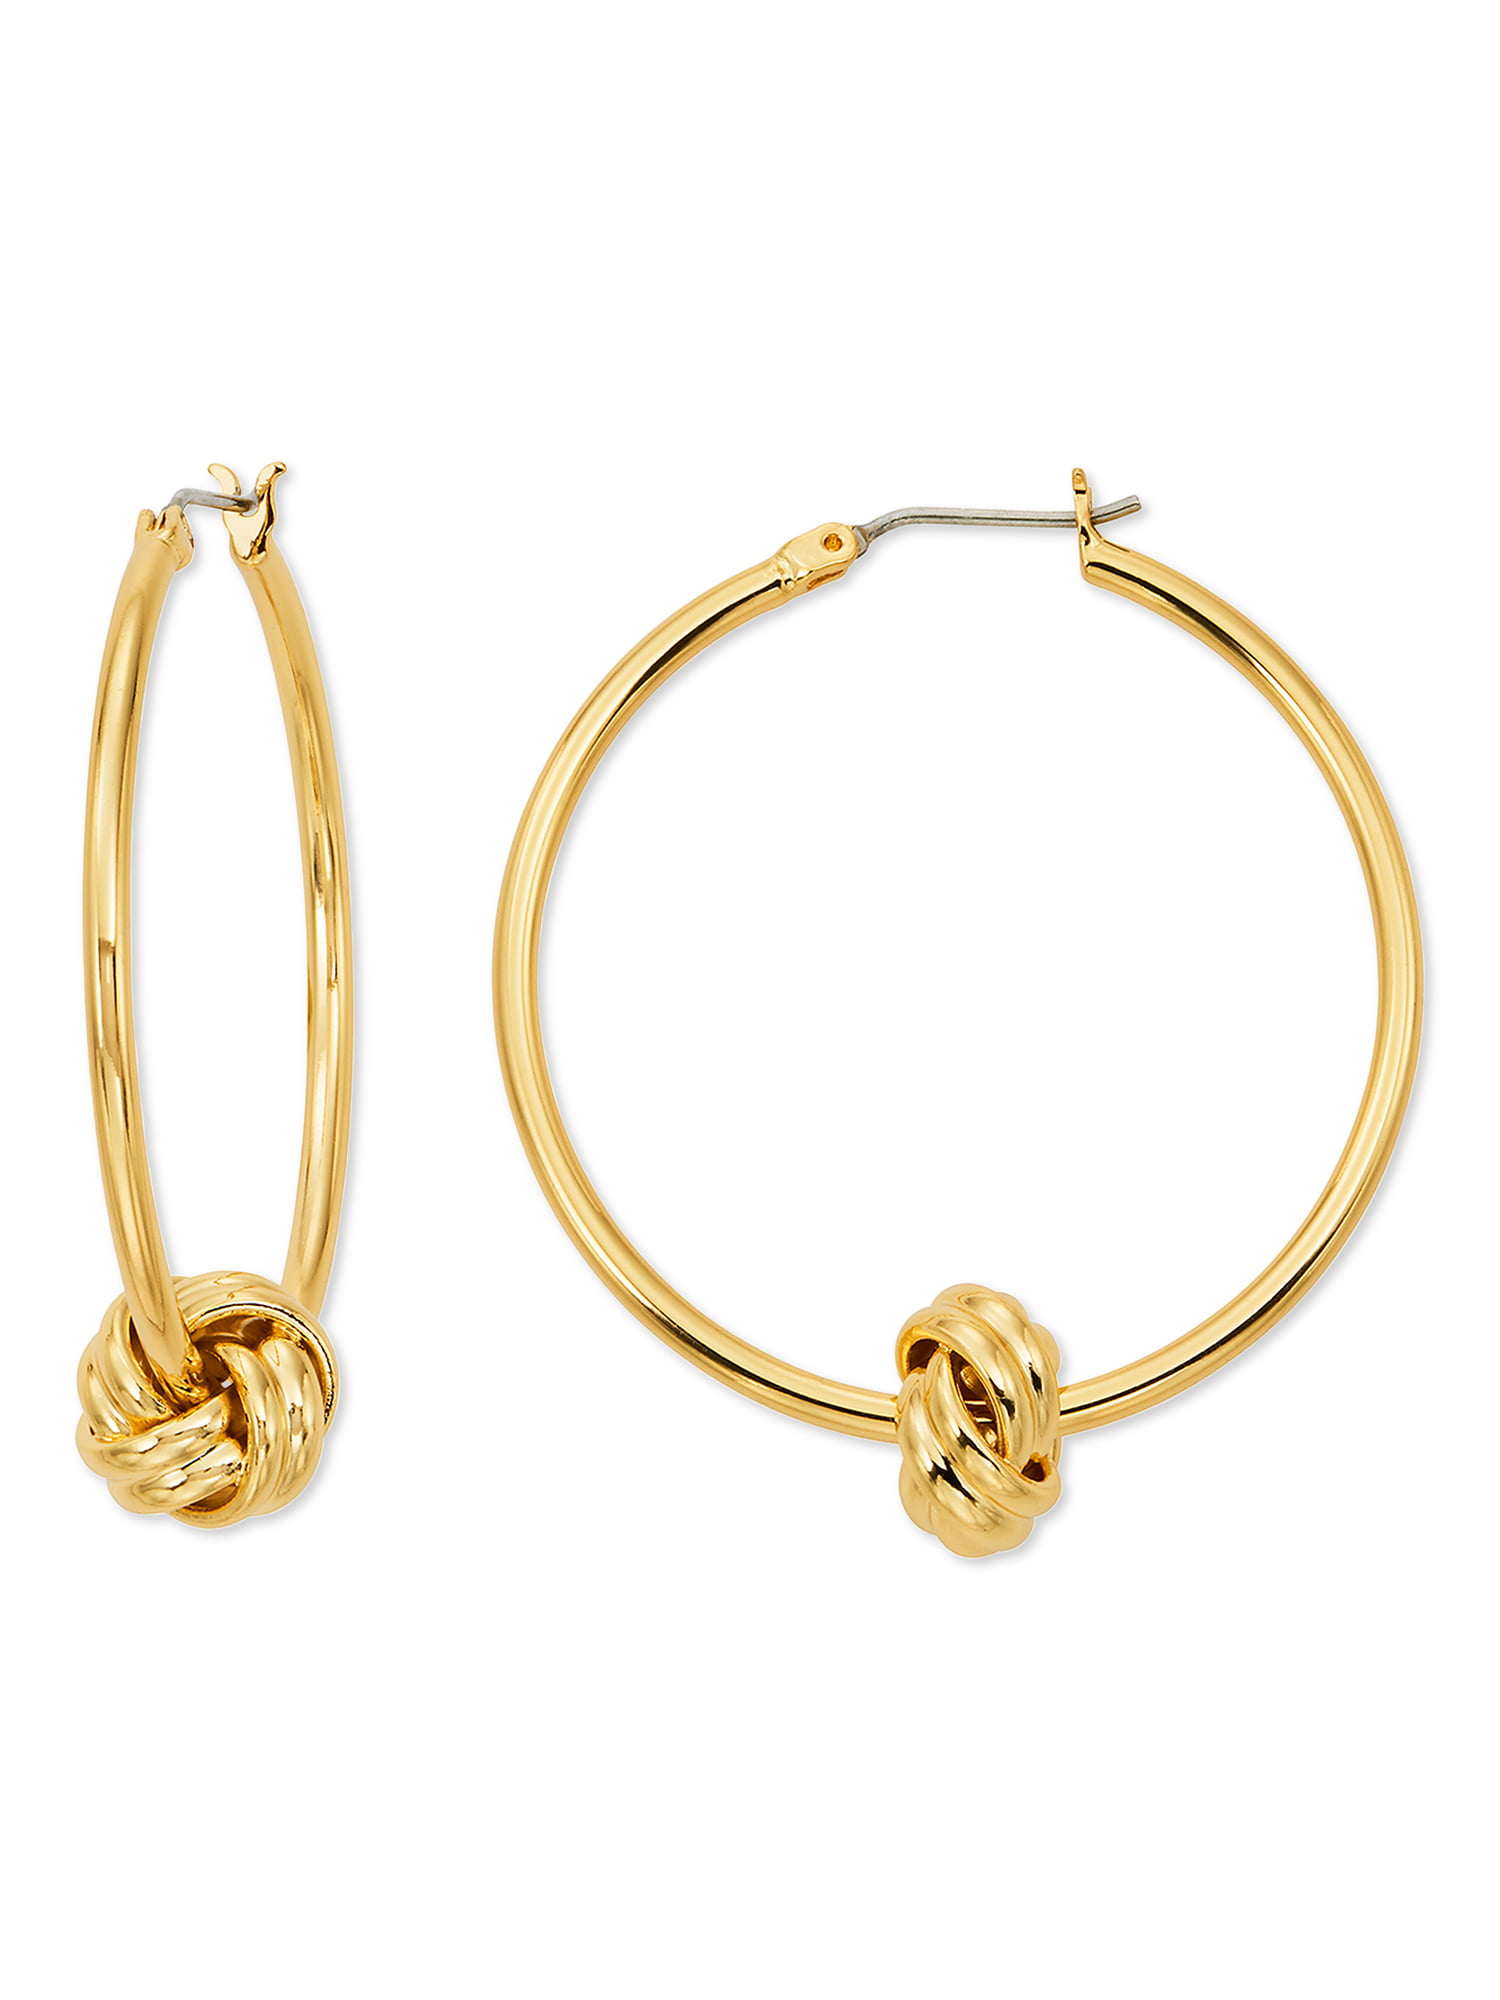 Minimalist Earrings Gift for her Unique Design Large Hoops Knotted Gold Plated Hoops Statement Earrings